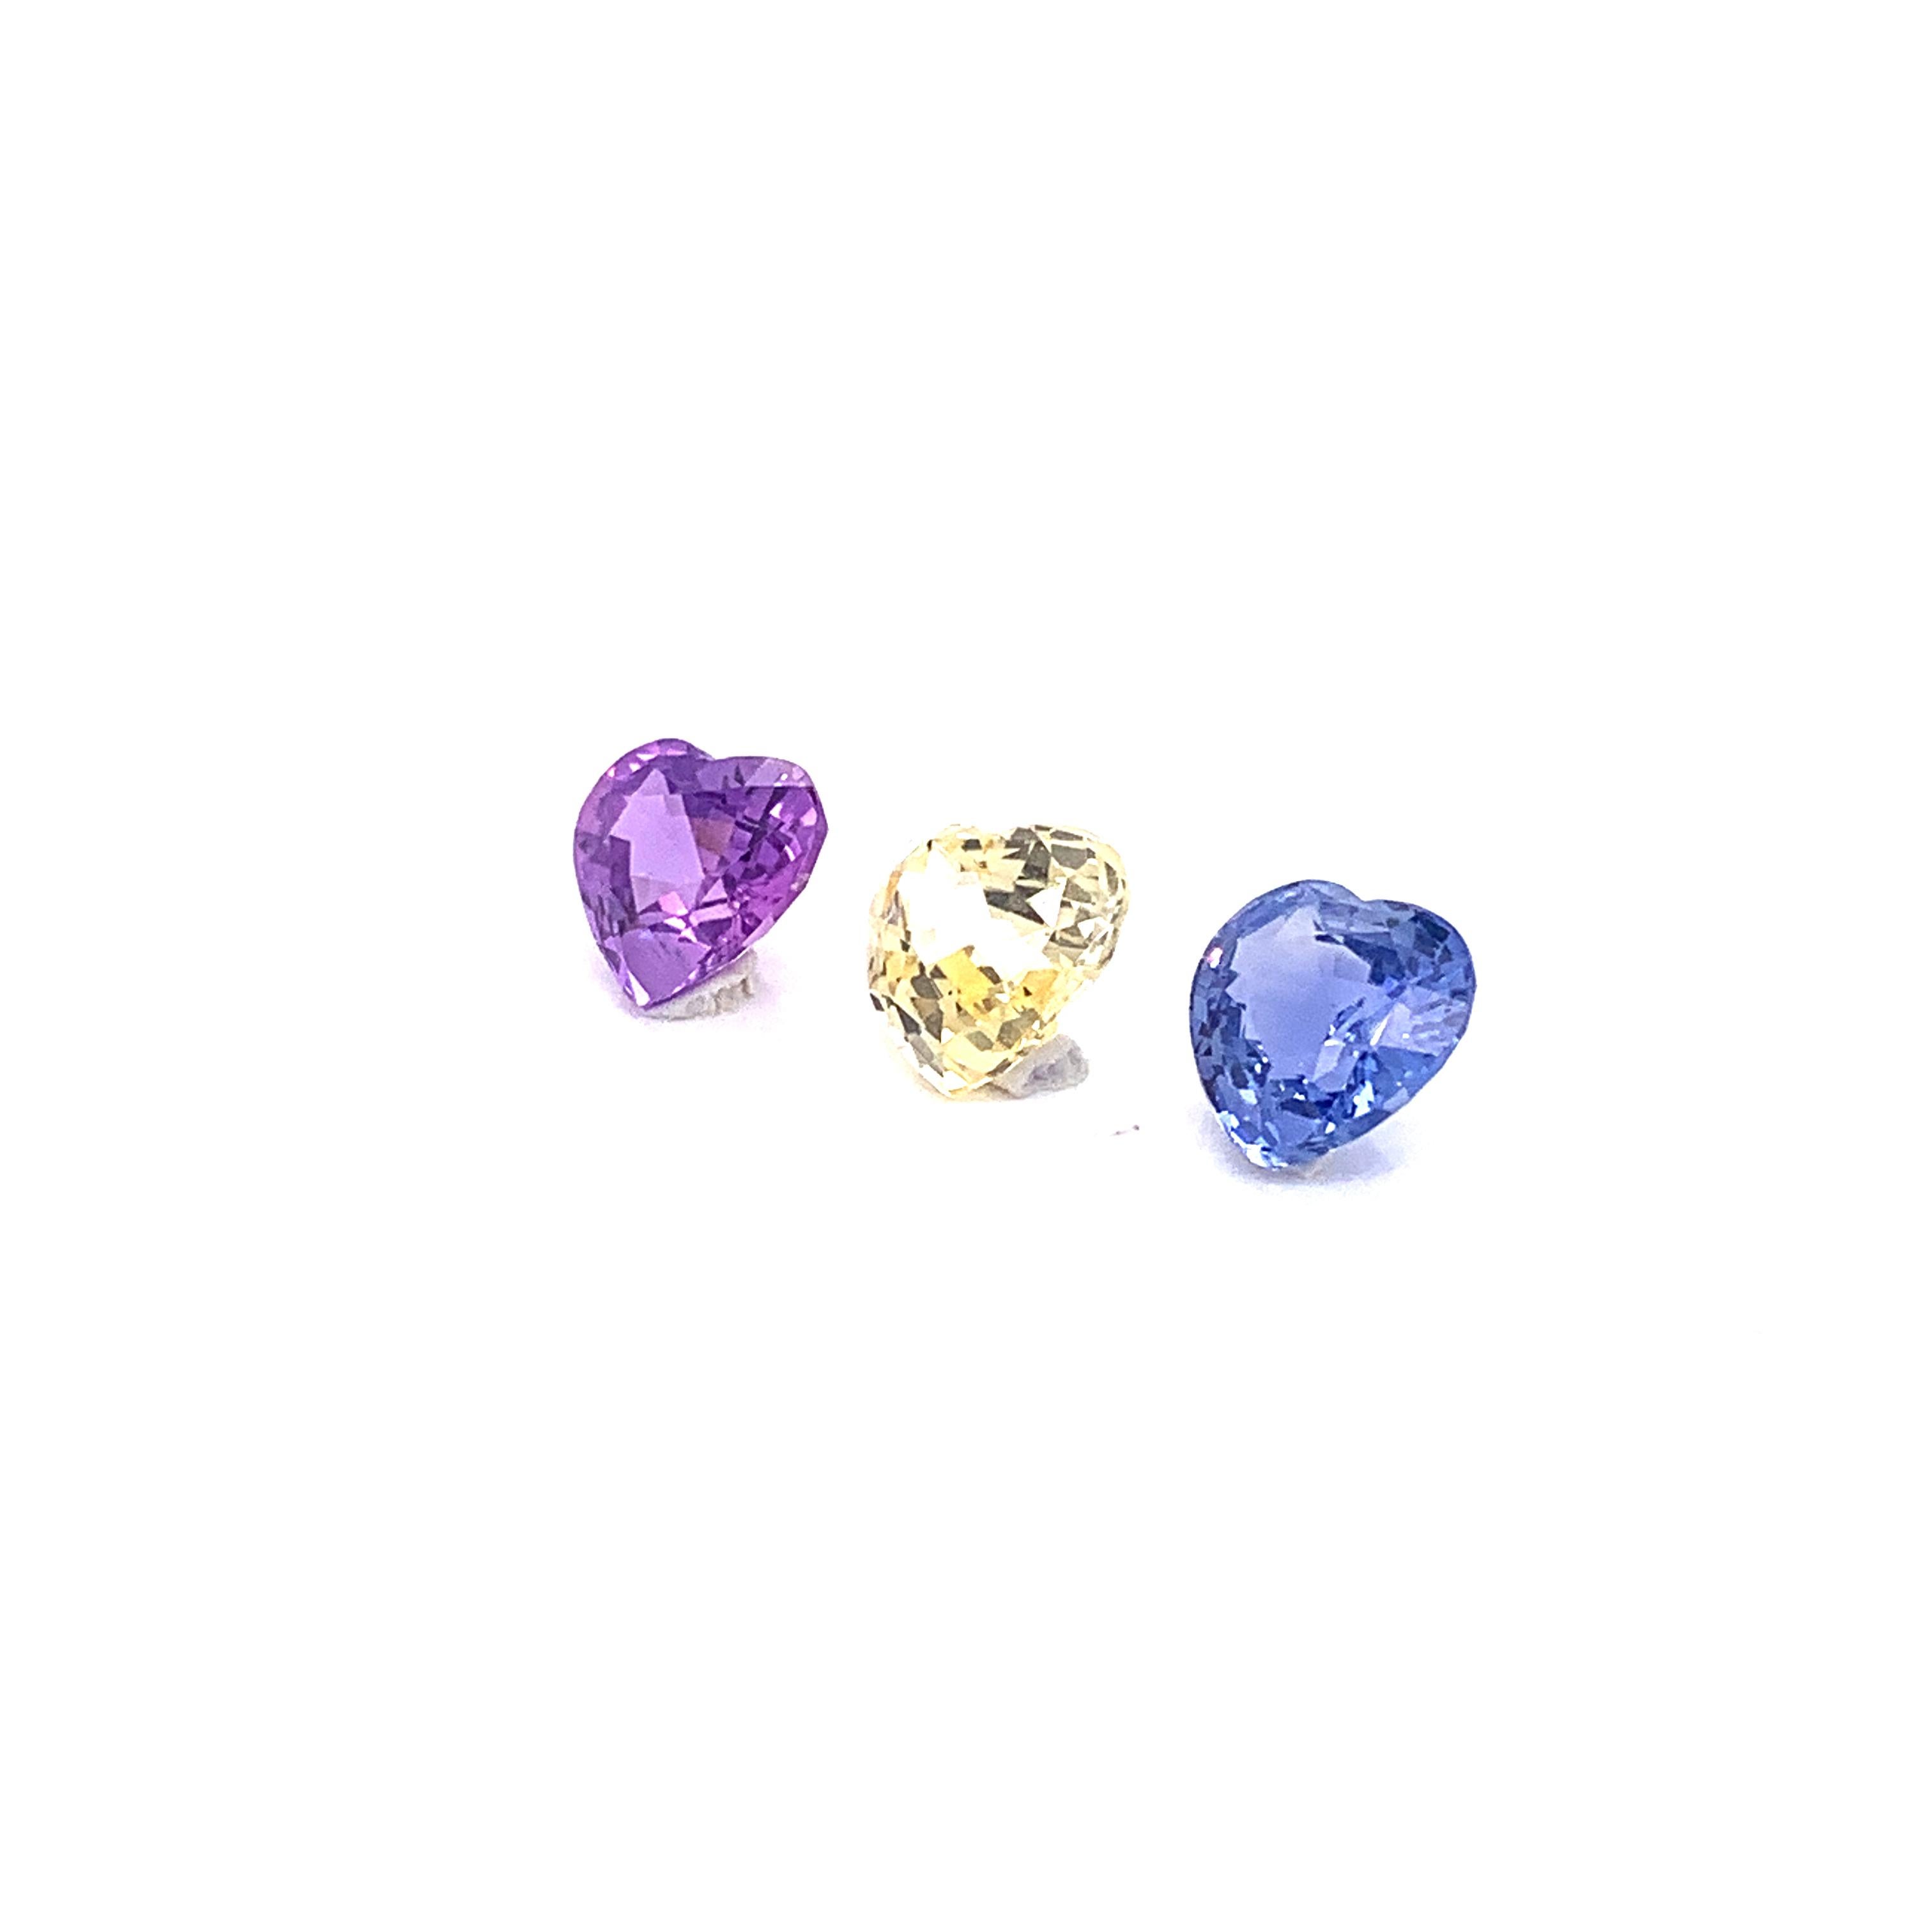 7.22 Carat Heart-Shaped Unheated Blue, Pink, and Yellow Sapphire Trio:

A scintillating trio, it features three natural unheated yellow, pink, and blue sapphires weighing a total of 7.22 carat. The sapphires are unheated, and have excellent cutting